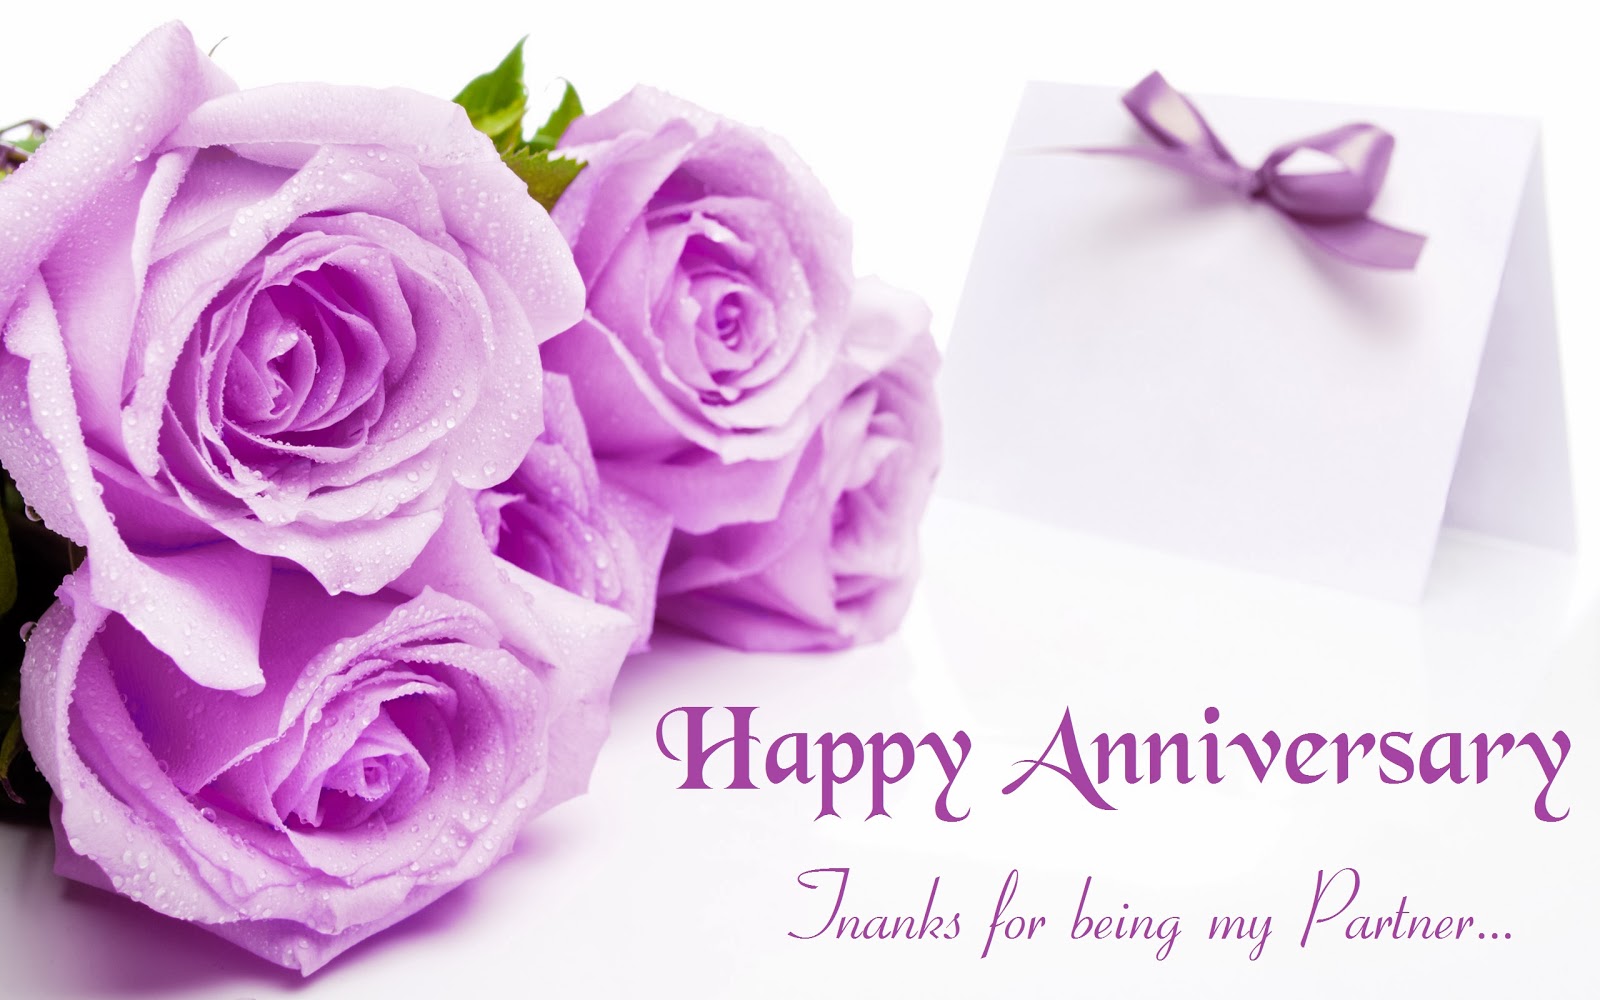 happy anniversary images hd - Clip Art Library